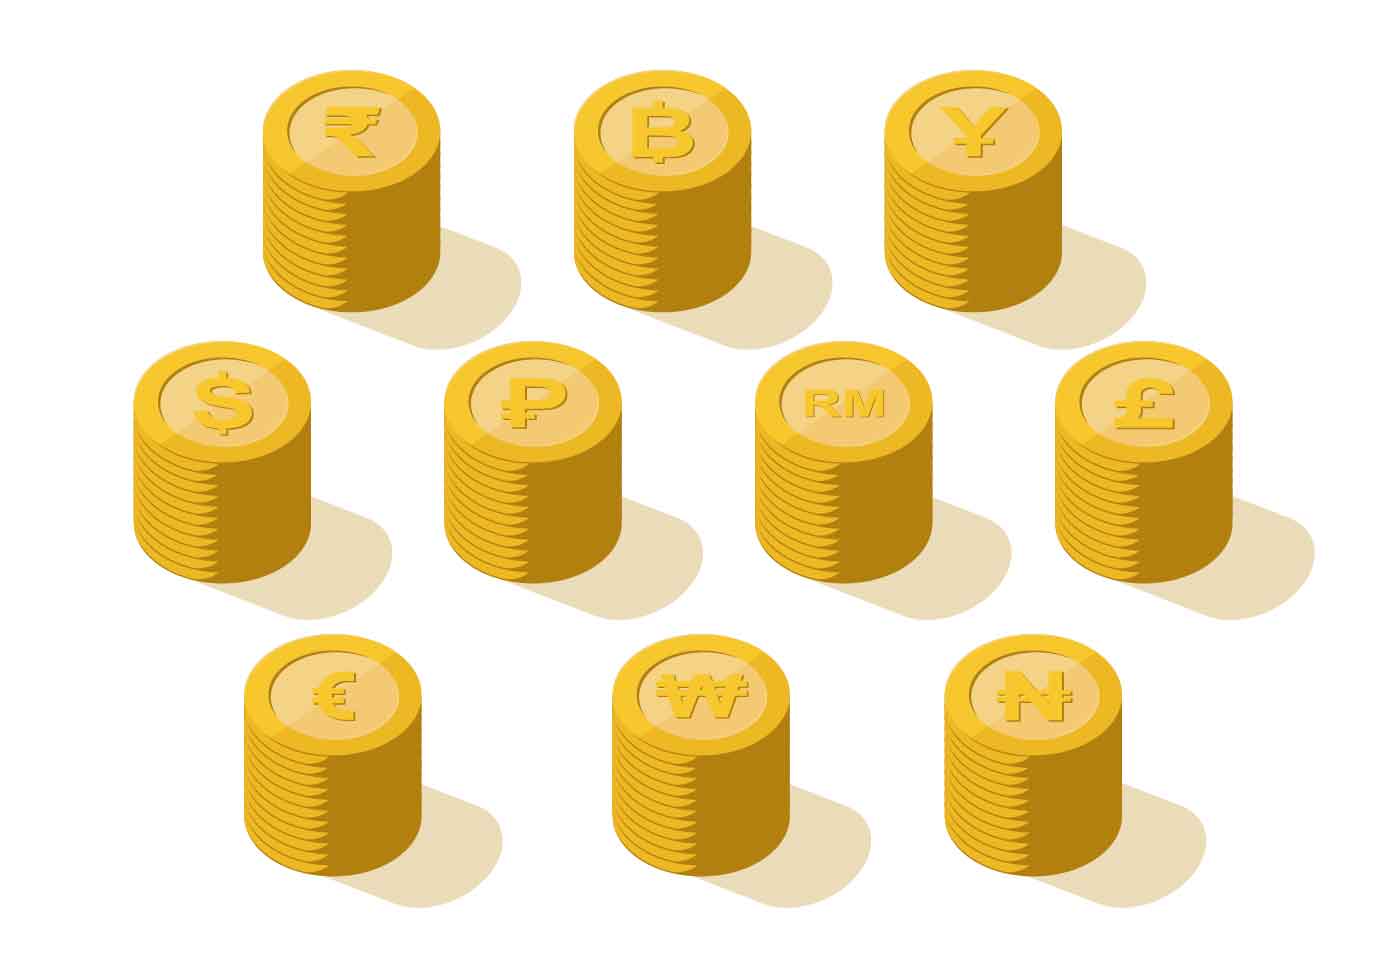 Coins Free Vector Art - (5262 Free Downloads)